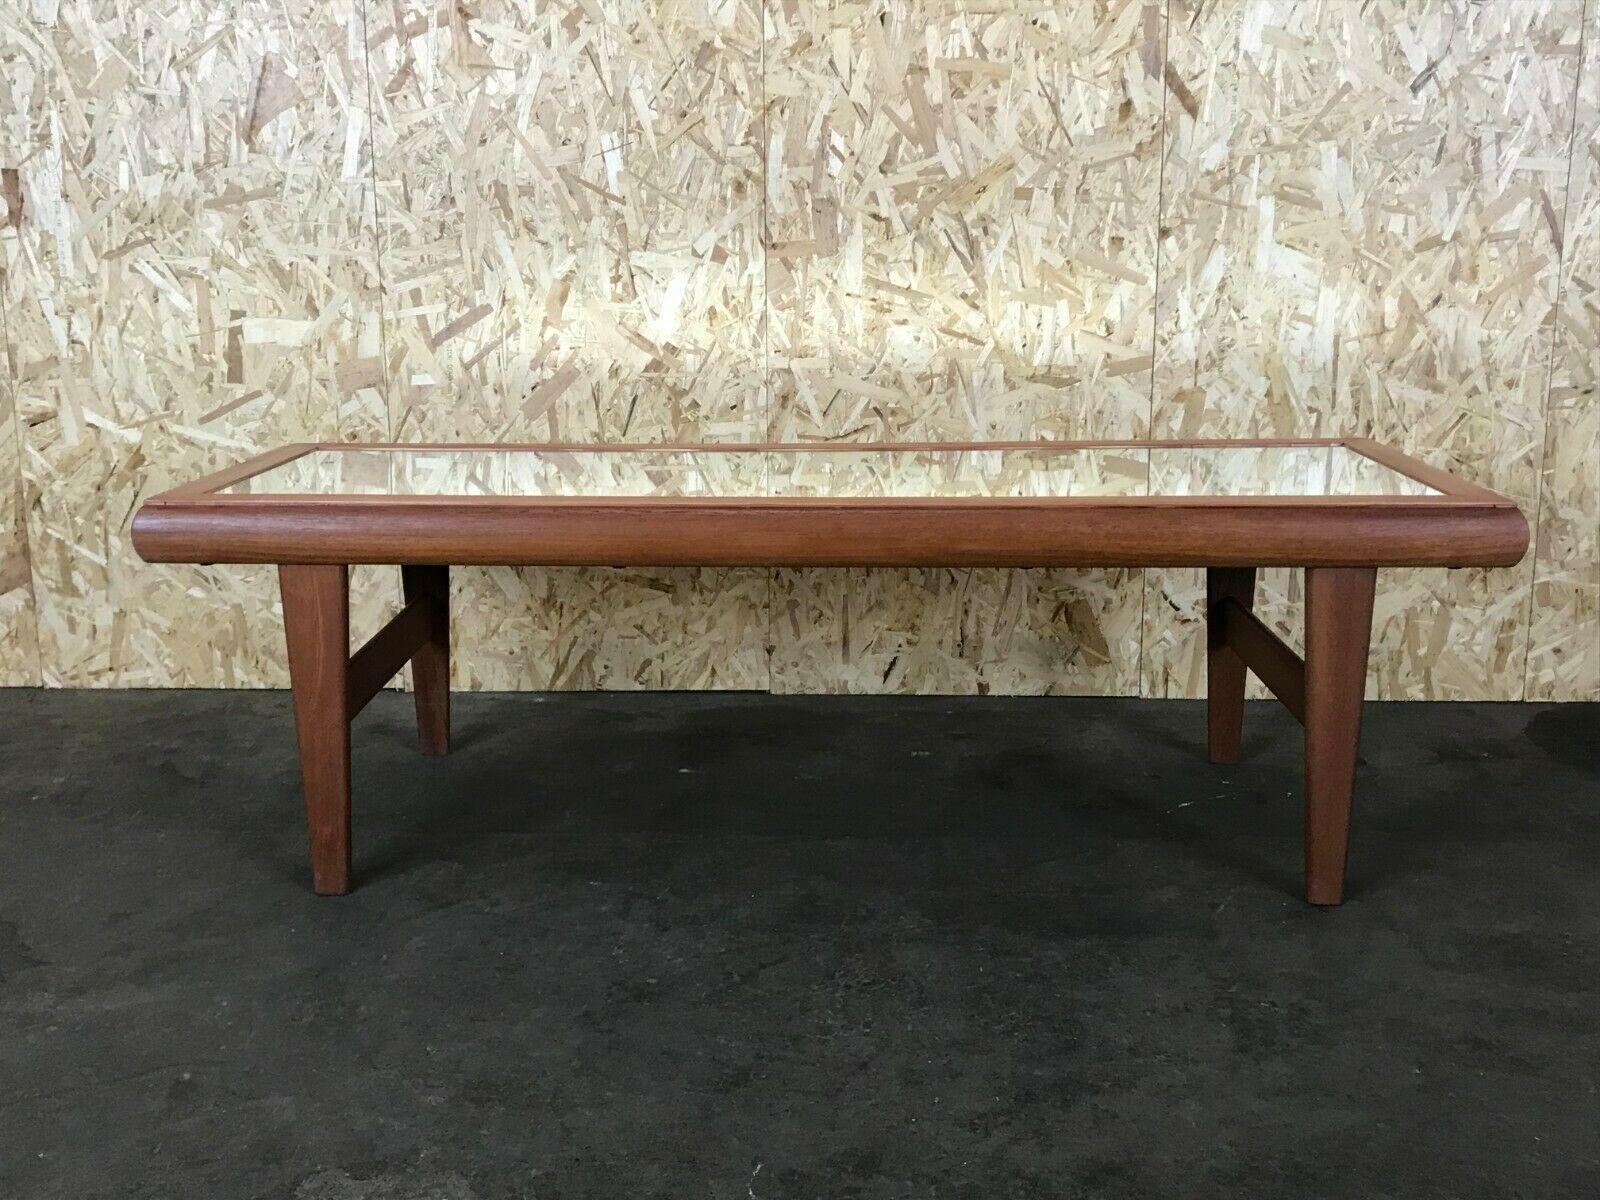 60s 70s Teak table coffee table Danish design with mirror 60s.

Object: coffee table

Manufacturer:

Condition: good

Age: around 1960-1970

Dimensions:

158.5cm x 58cm x 48cm

Other notes:

The pictures serve as part of the